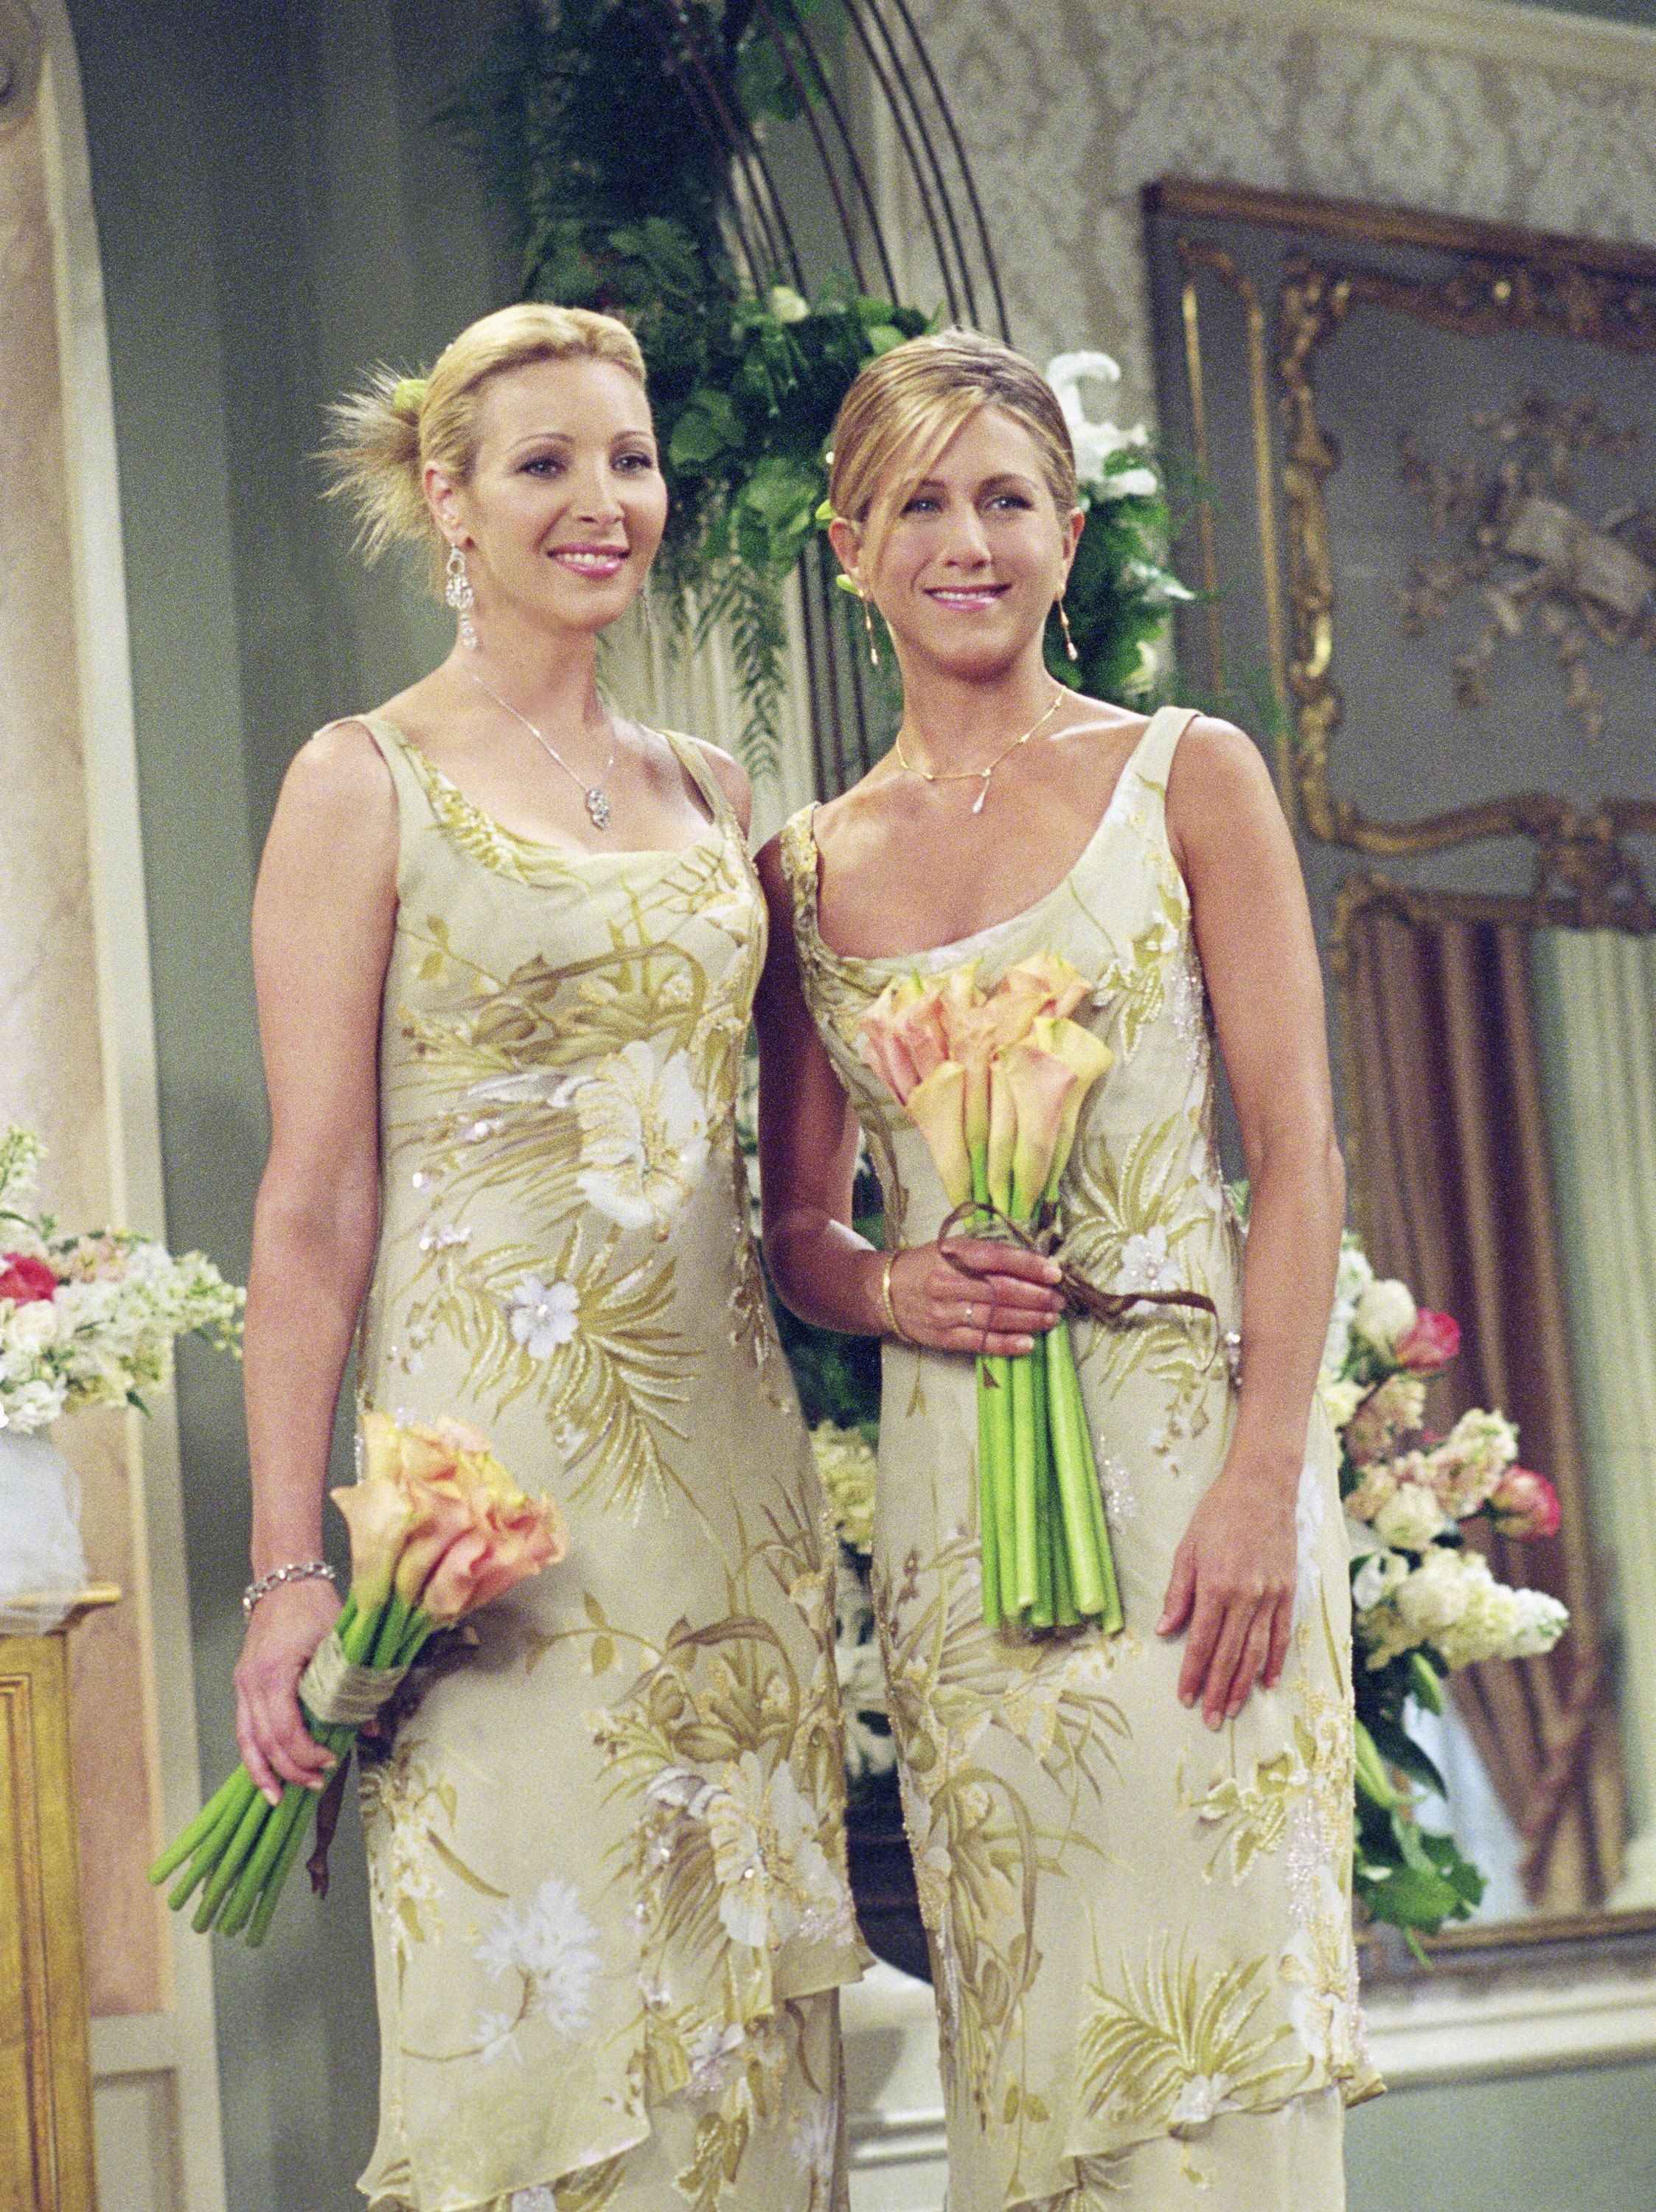 Top 'Friends' Wedding Looks To Recreate | Guides for Brides